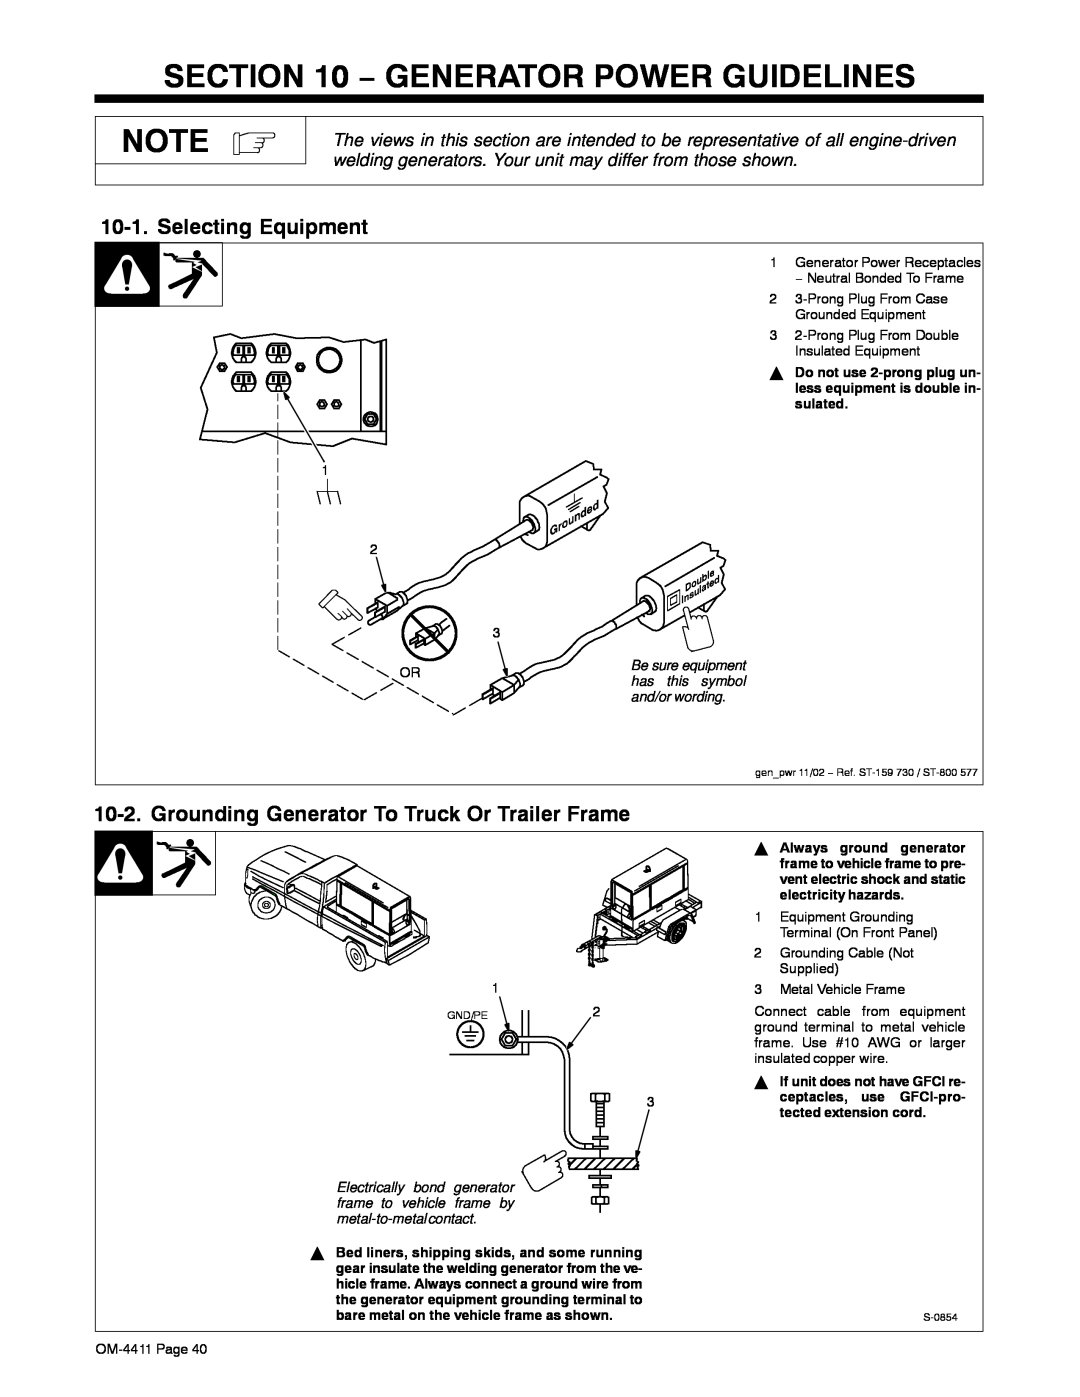 Miller Electric 301 G manual Generator Power Guidelines, Selecting Equipment, Grounding Generator To Truck Or Trailer Frame 